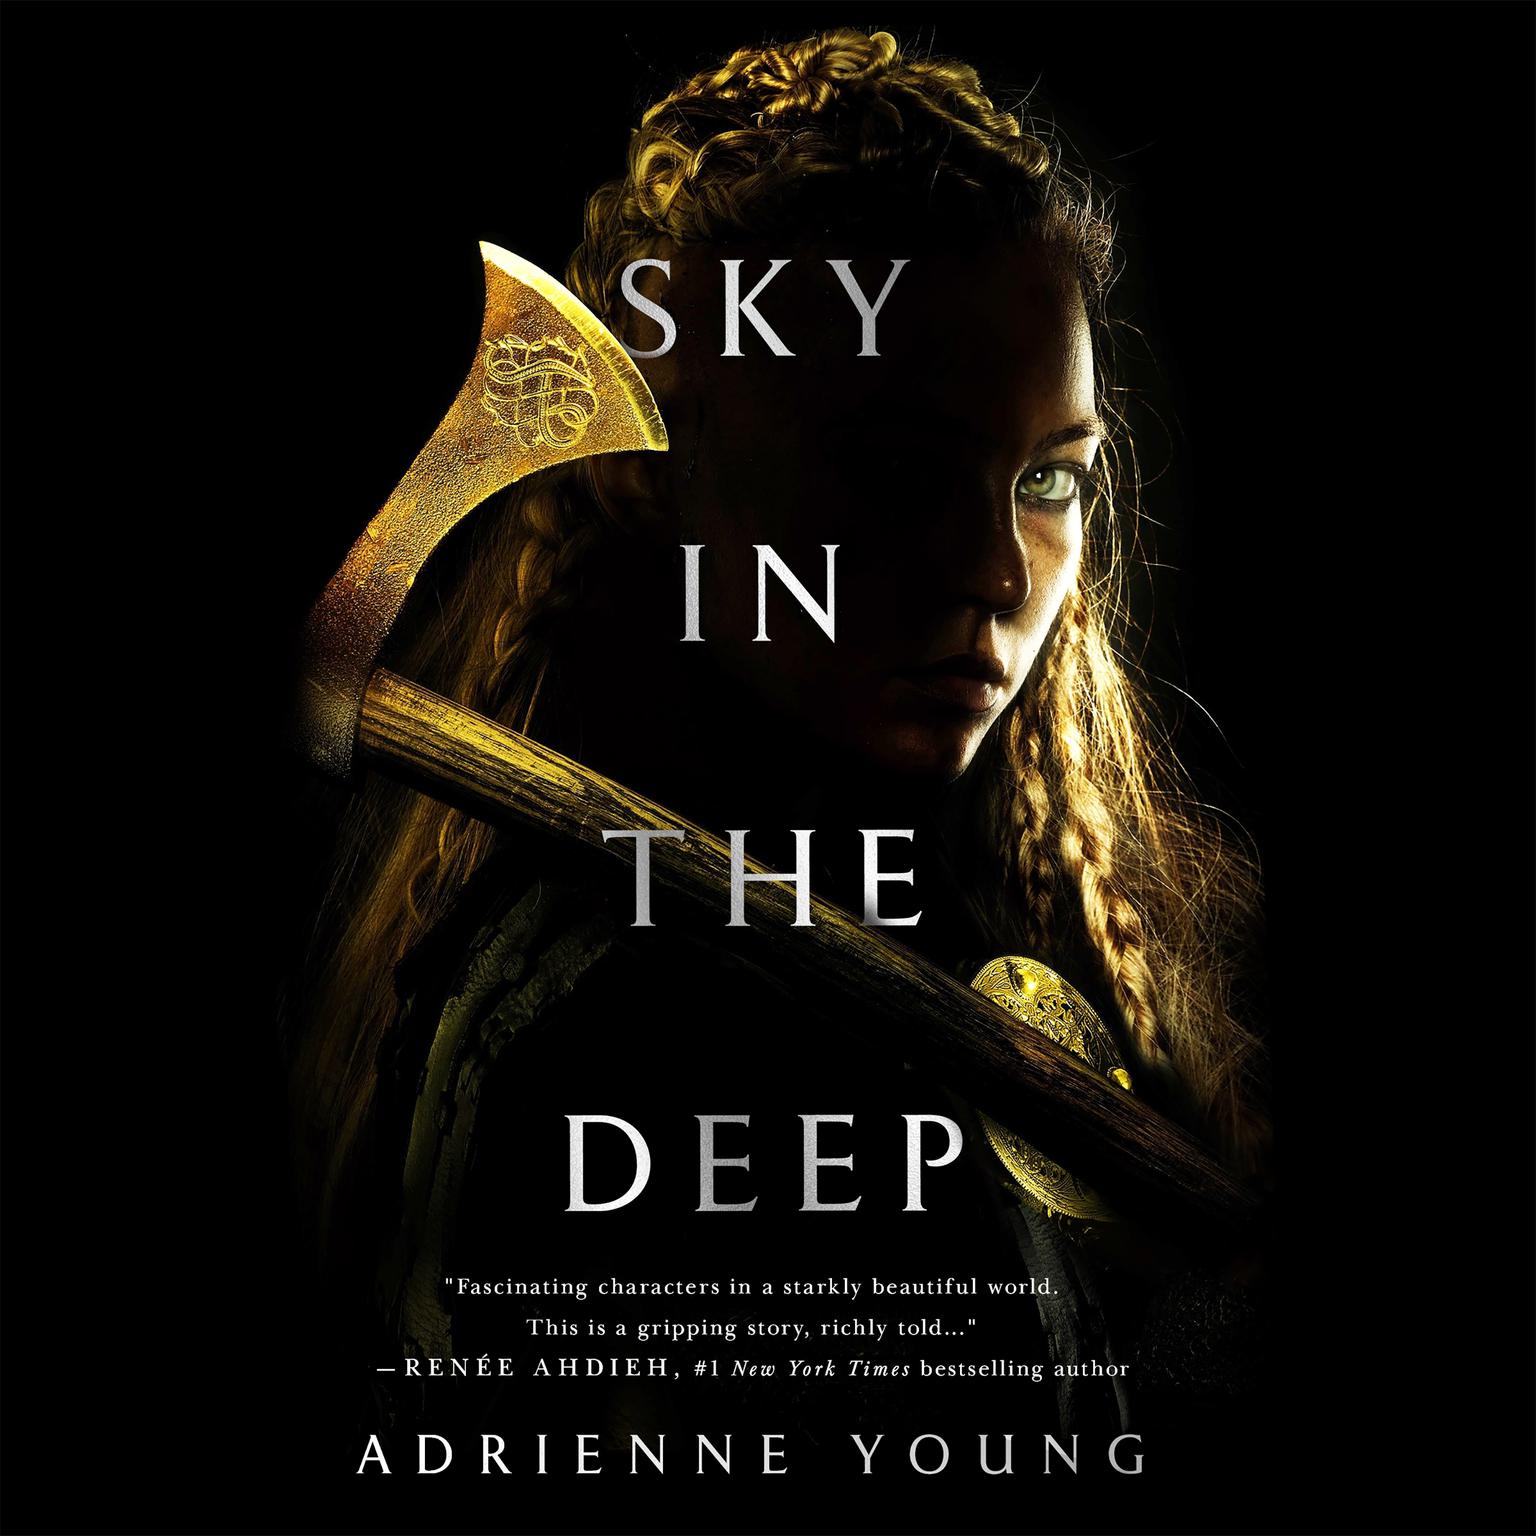 Sky in the Deep Audiobook, by Adrienne Young